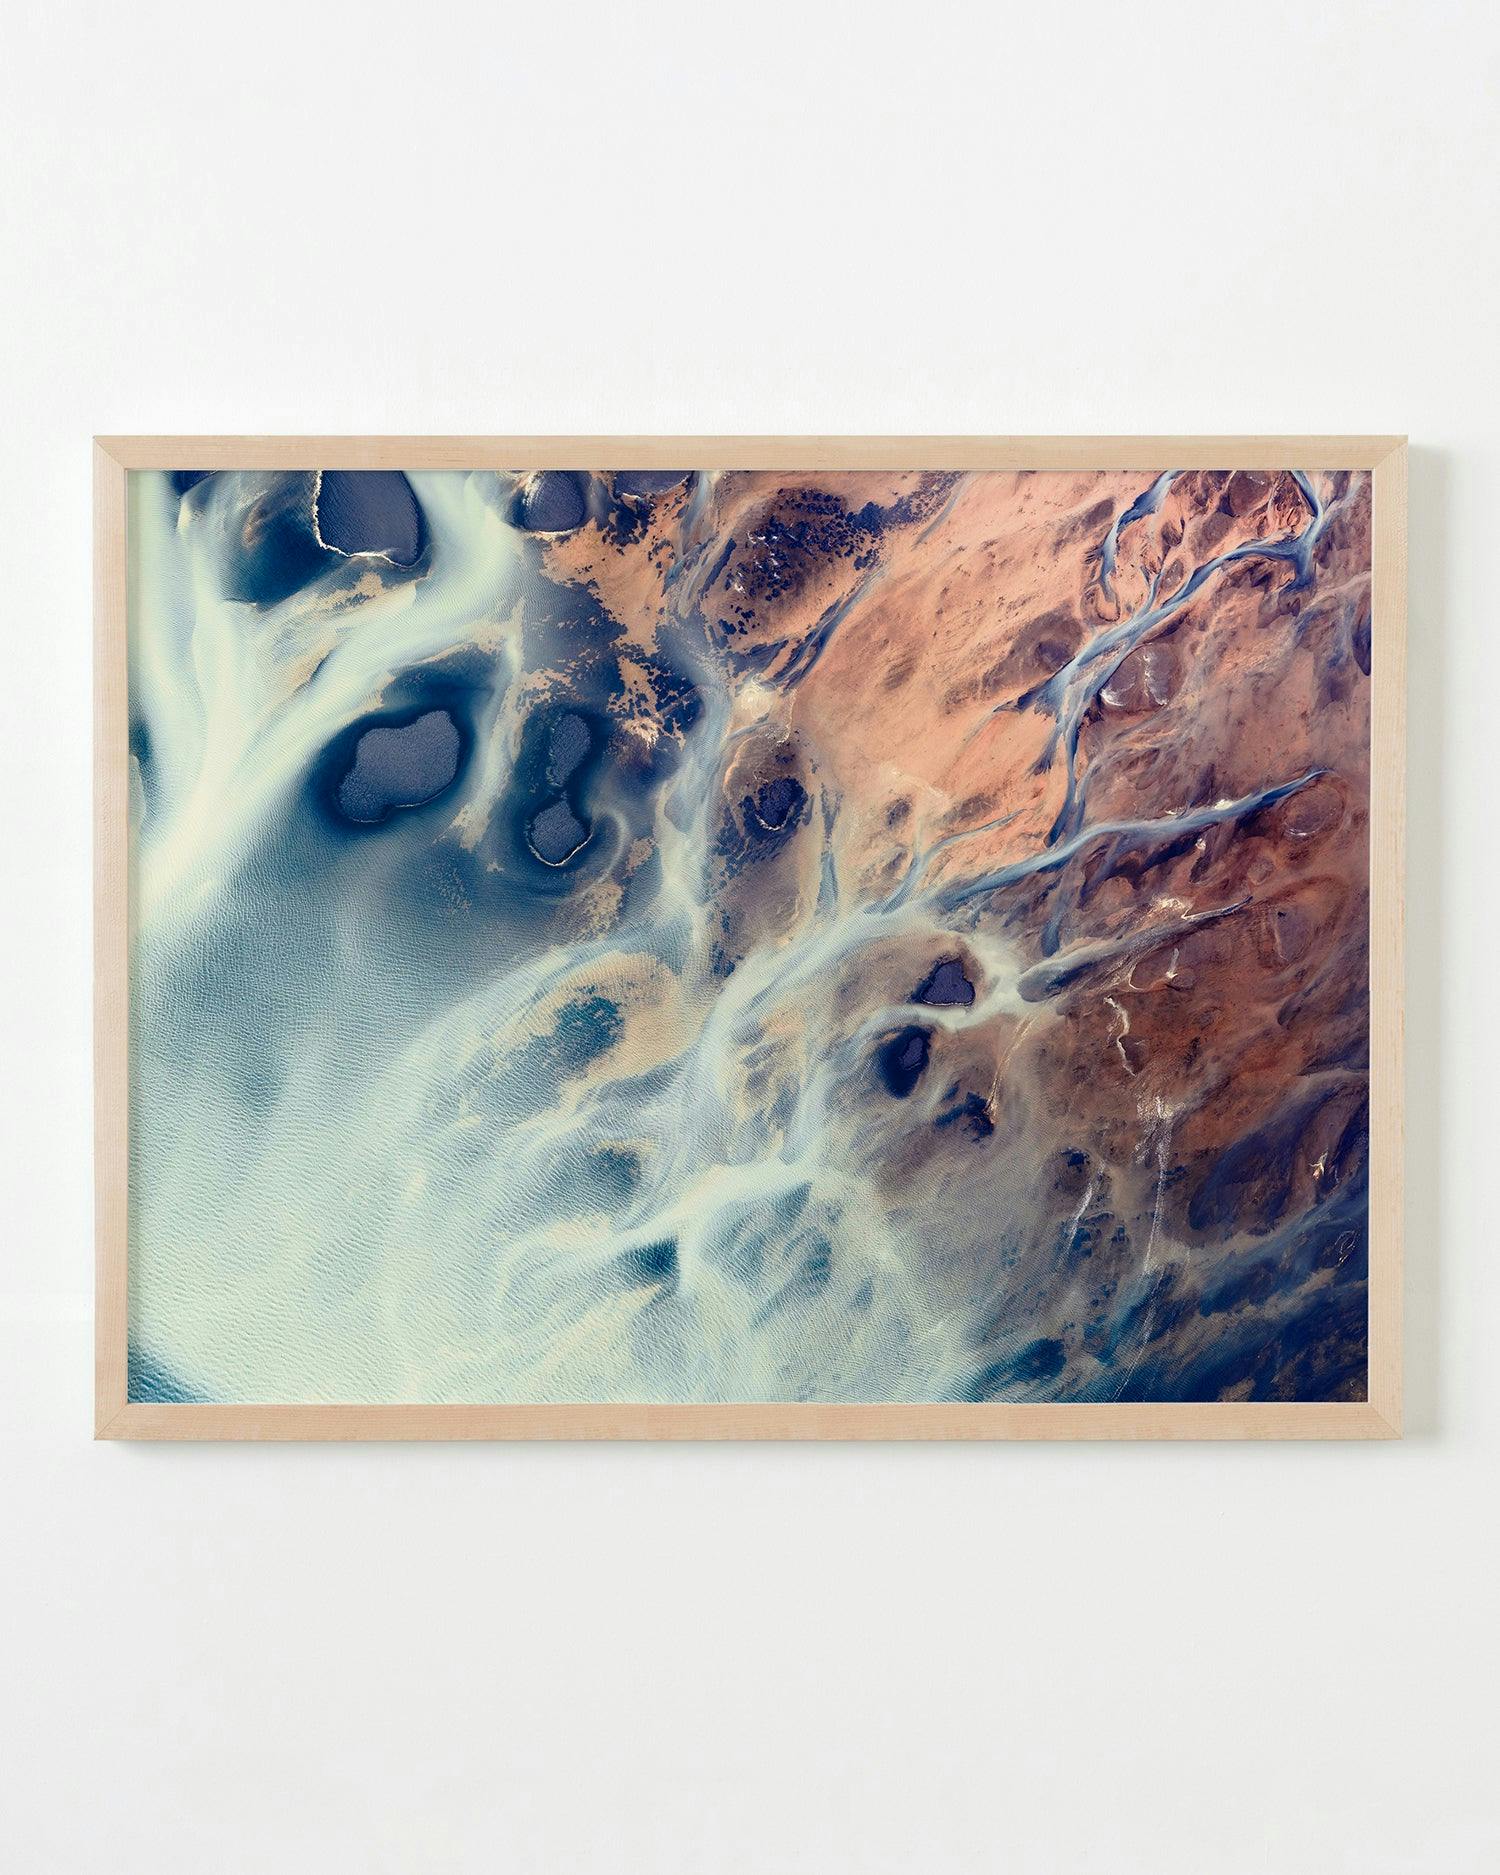 Photography by Brooke Holm titled "Mineral Matter II.III".